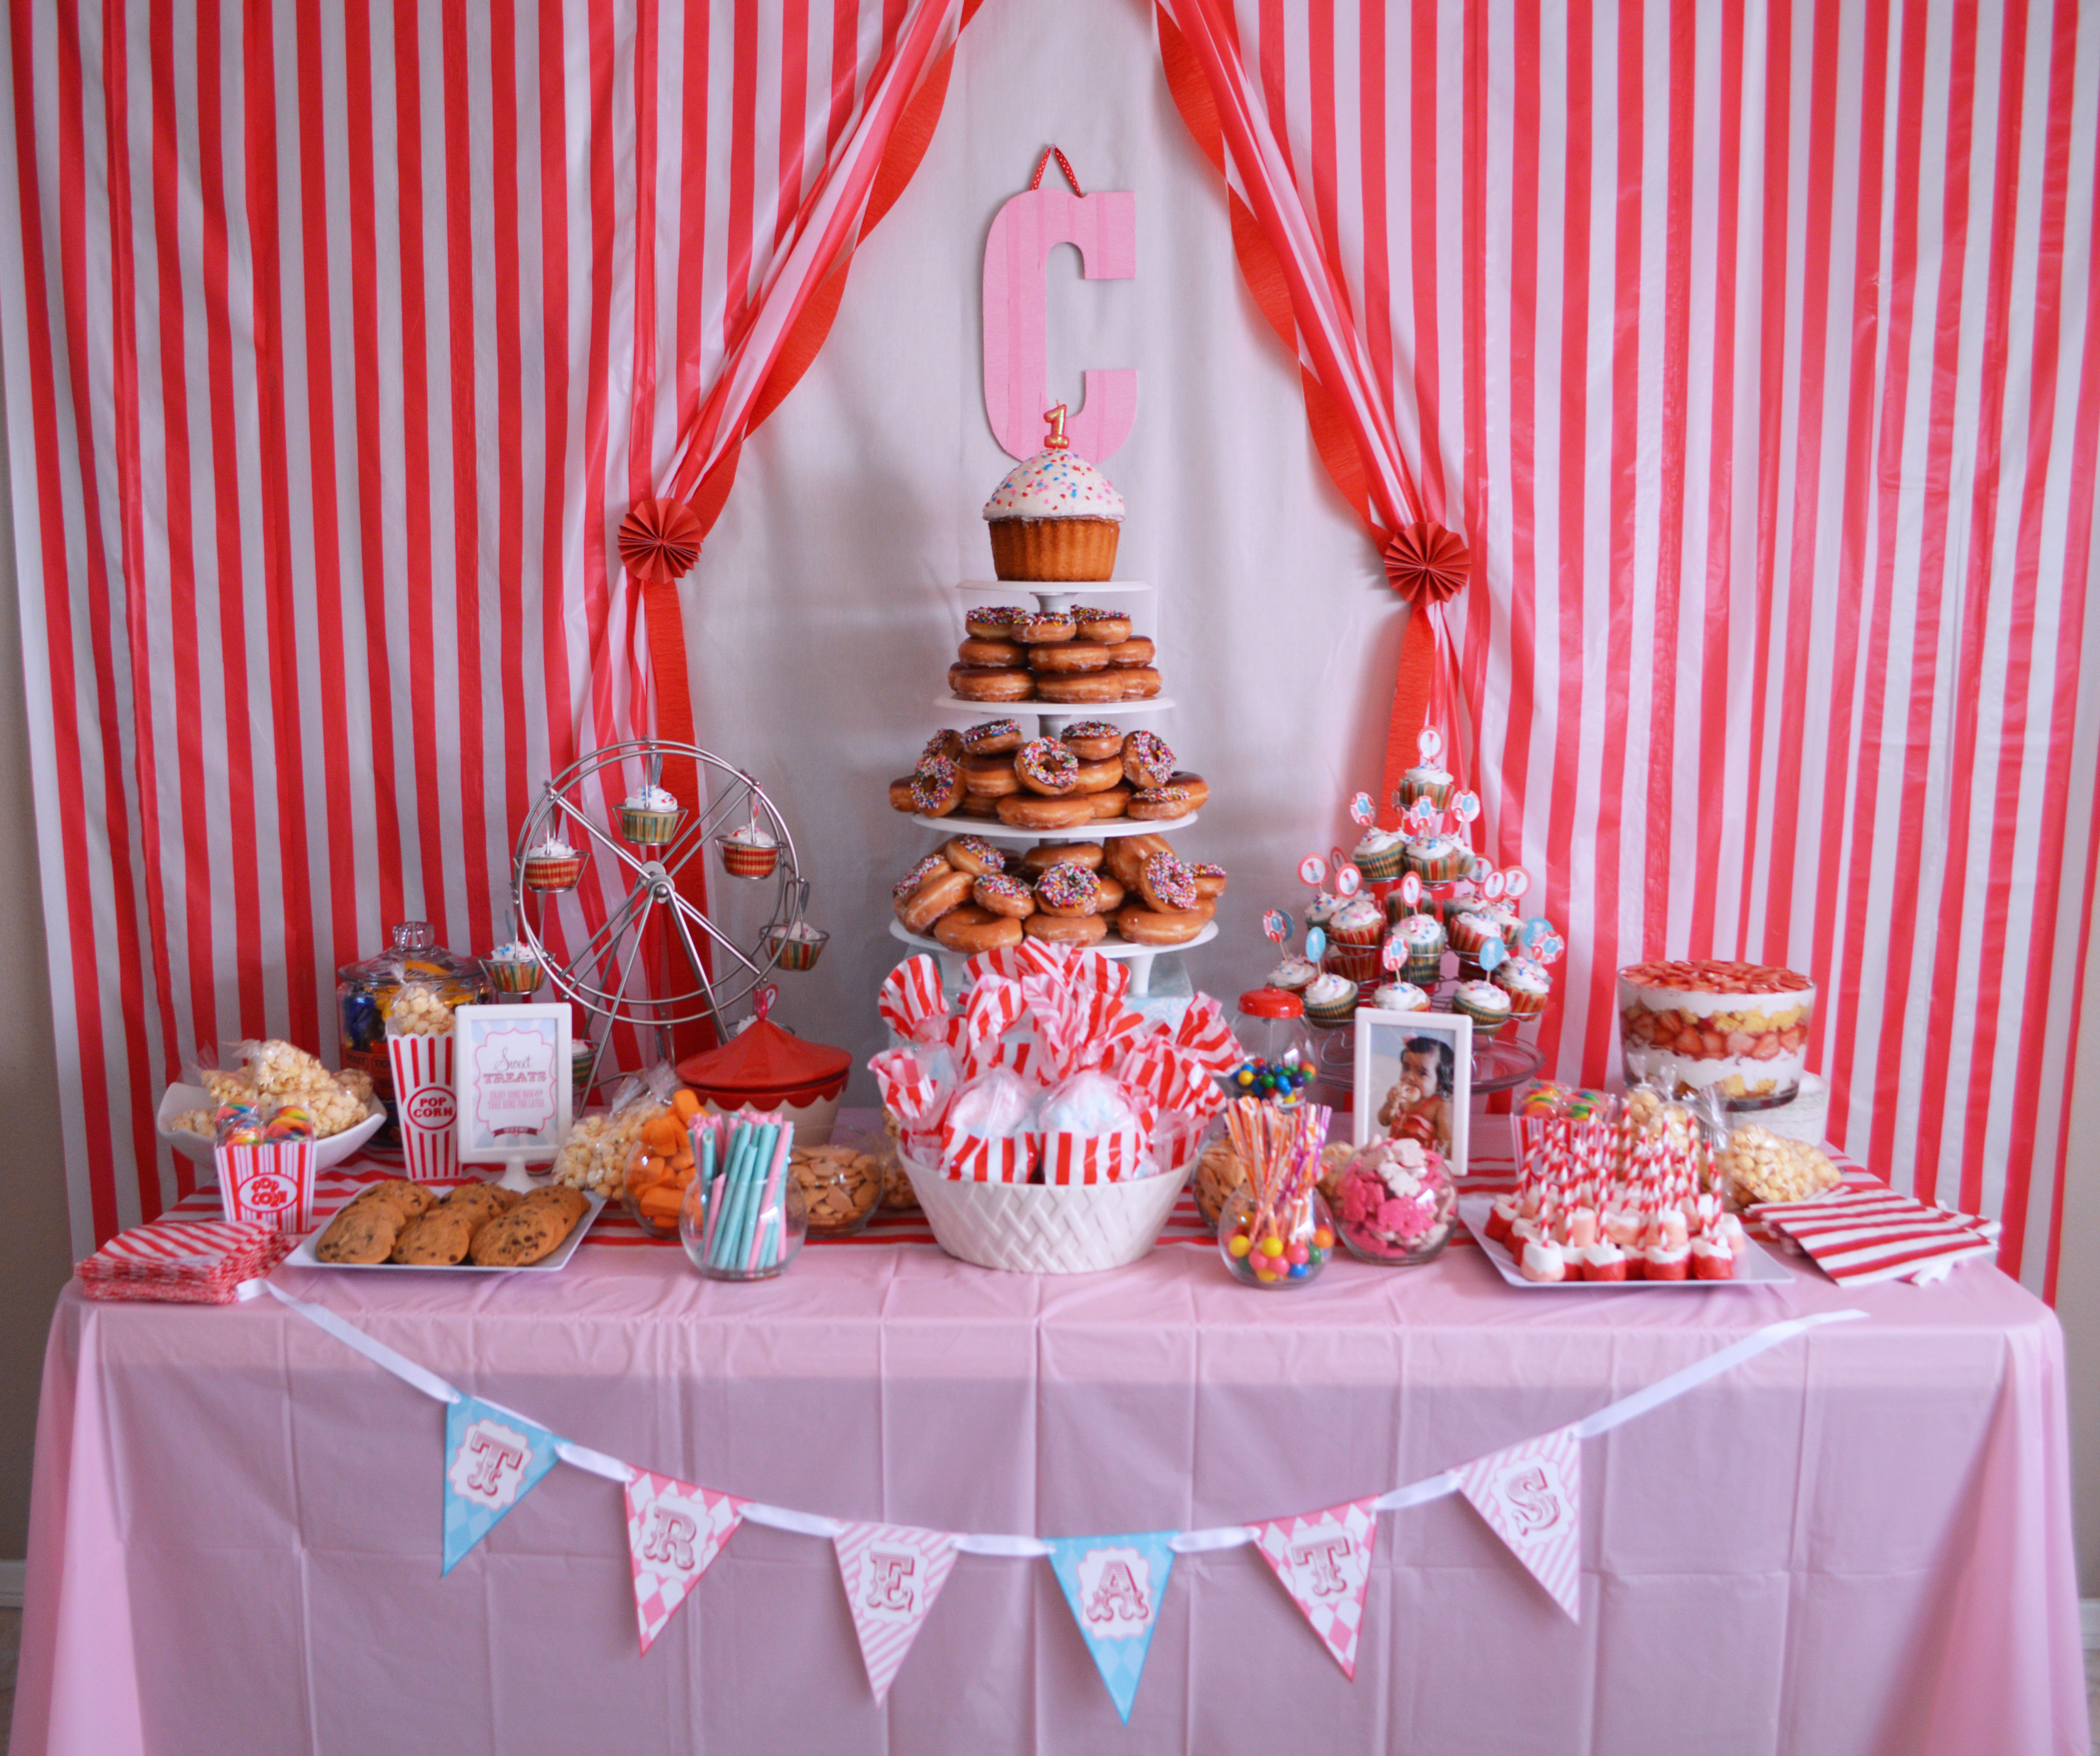 The Frosted Chick Bakery | Darn Delicious Dessert Tables